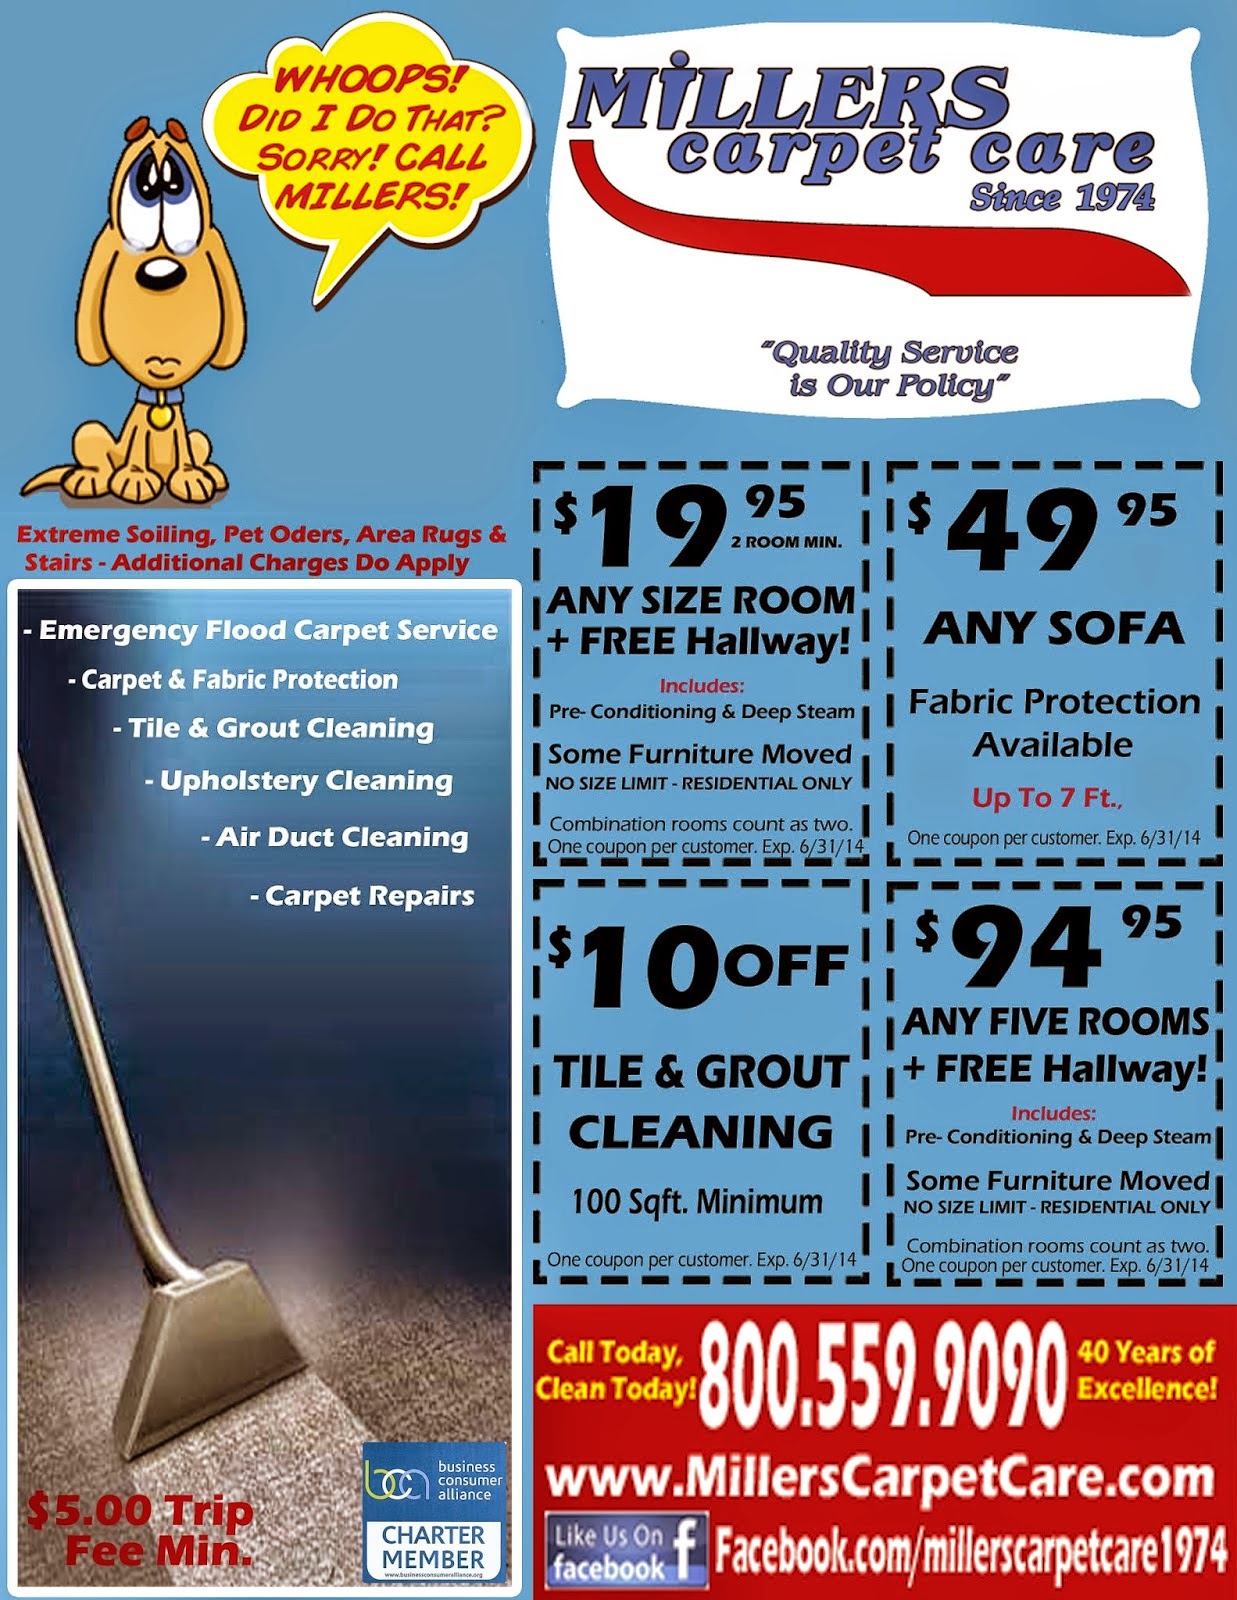 Miller's Carpet Care Offers Quality Service at Affordable Prices